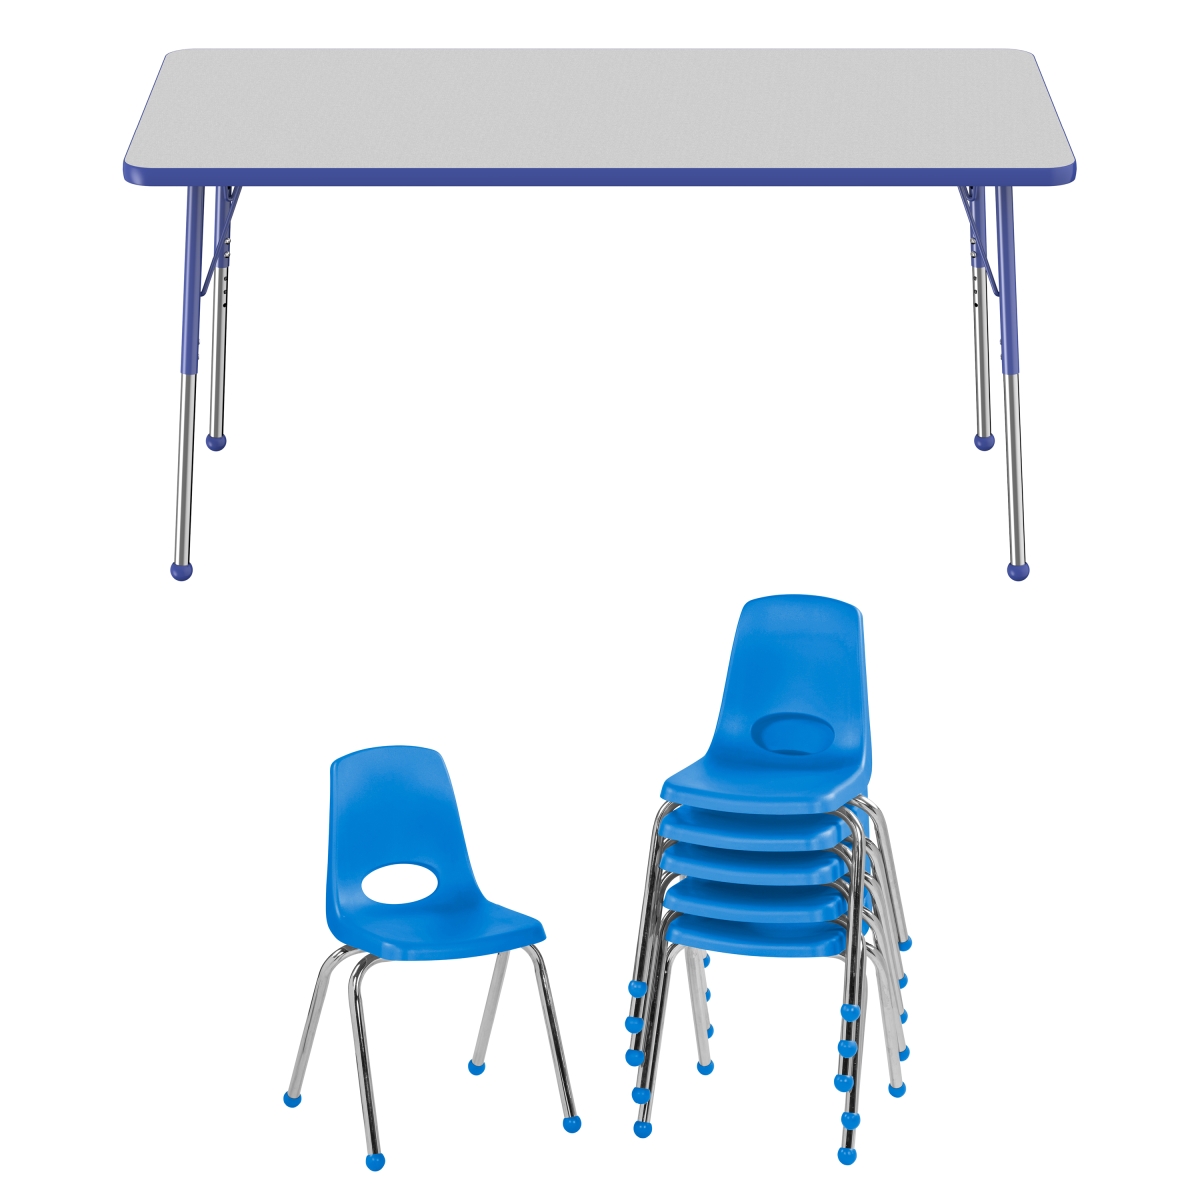 10301-gybl 30 X 60 In. Rectangle T-mold Adjustable Activity Table Standard Ball With 6 Stack Chairs 16 In. Ball Glide - Grey & Blue